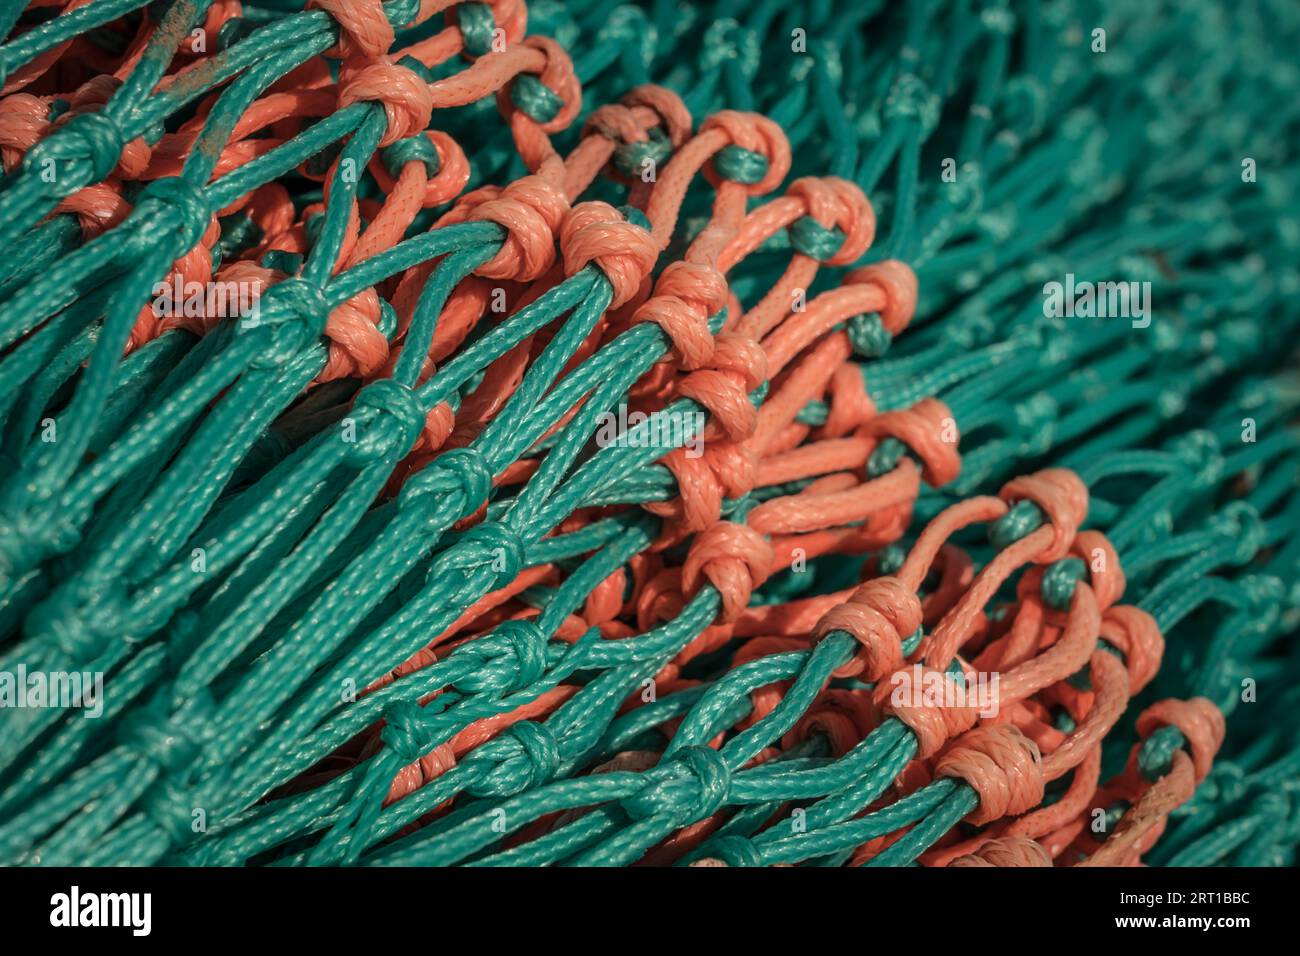 detail of old fishing nets Stock Photo